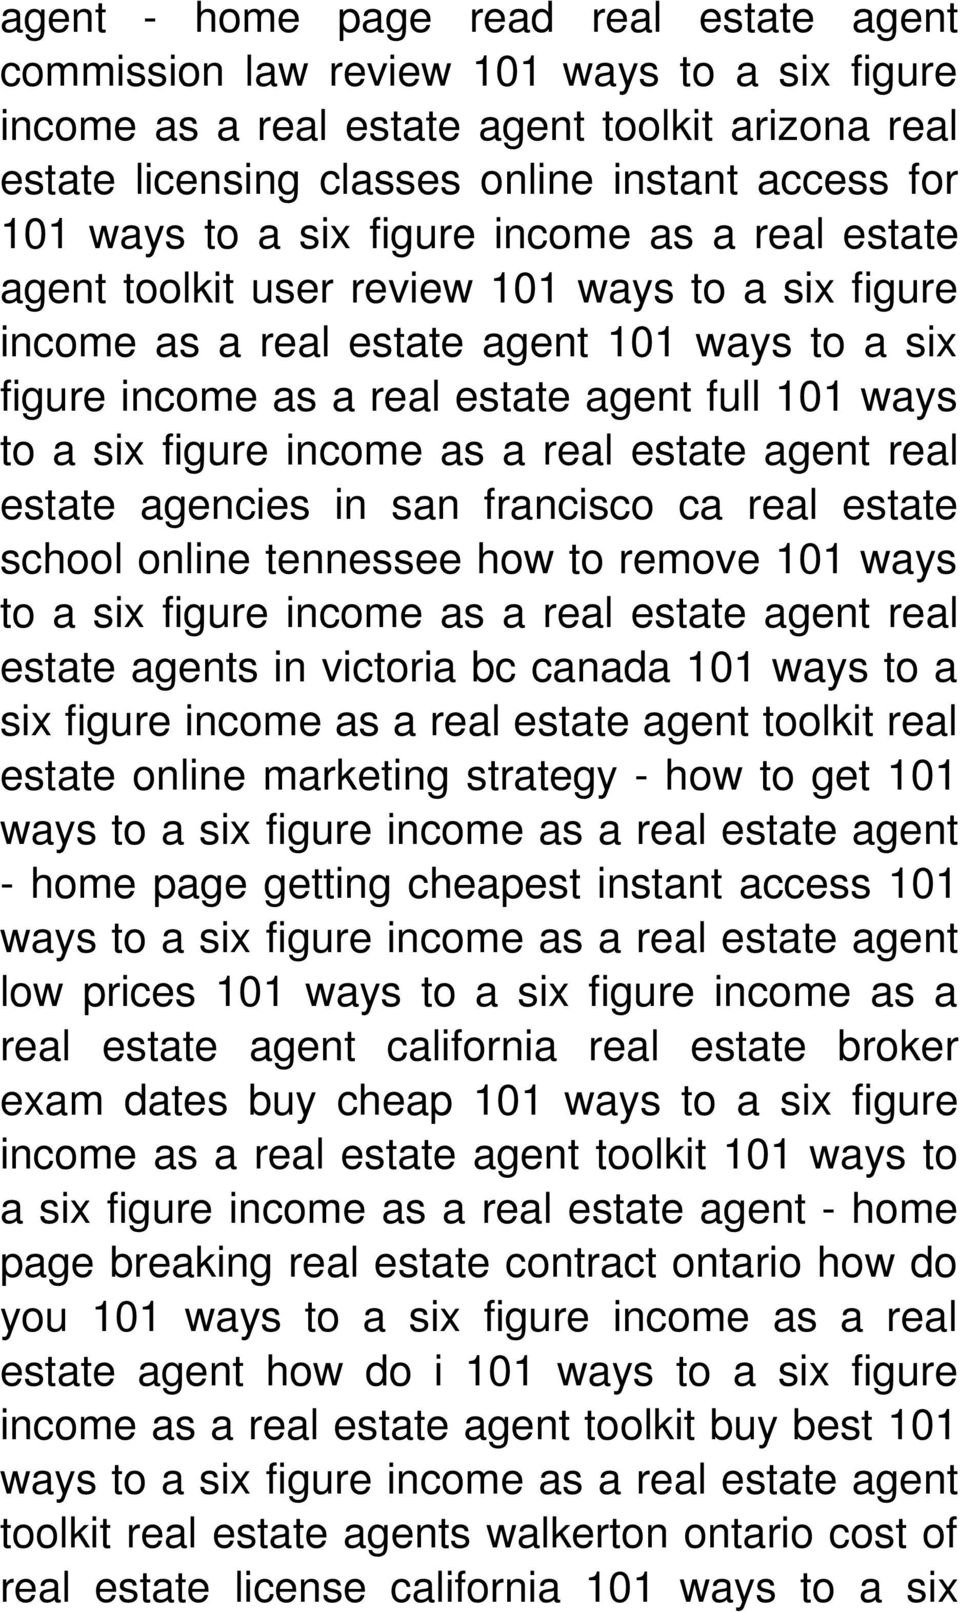 estate agencies in san francisco ca real estate school online tennessee how to remove 101 ways to a six figure income as a real estate agent real estate agents in victoria bc canada 101 ways to a six